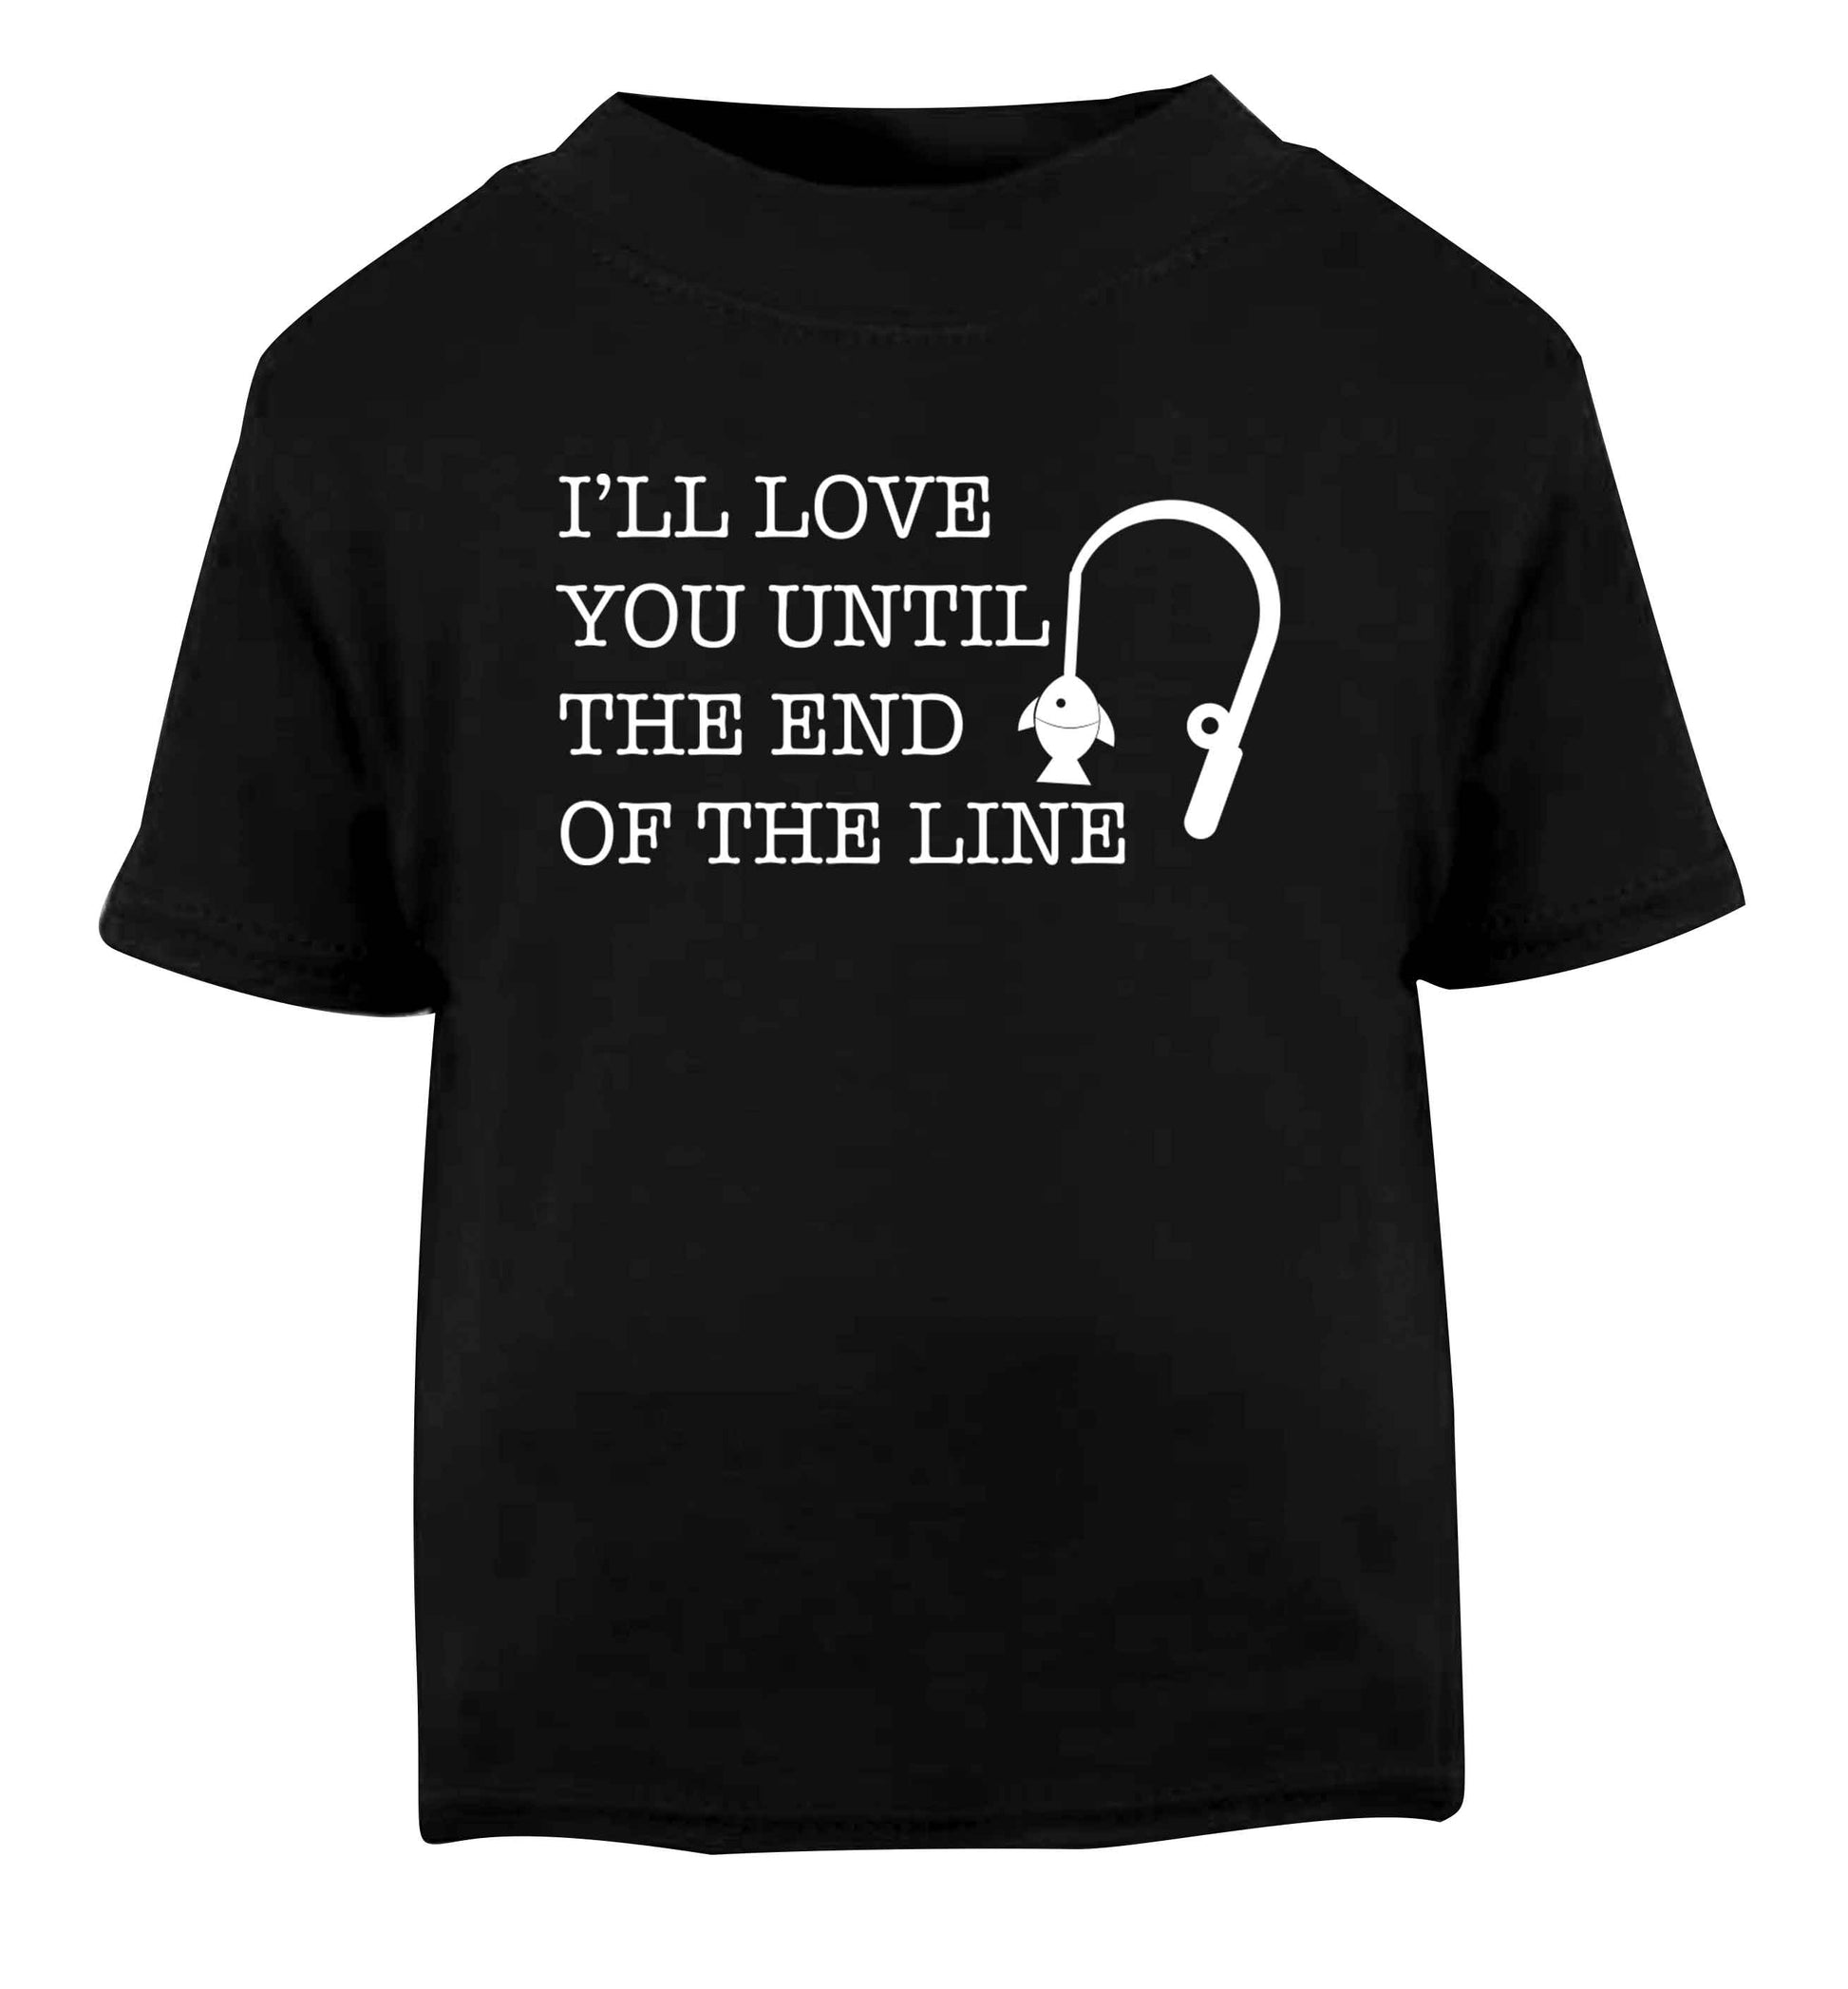 I'll love you until the end of the line Black Baby Toddler Tshirt 2 years